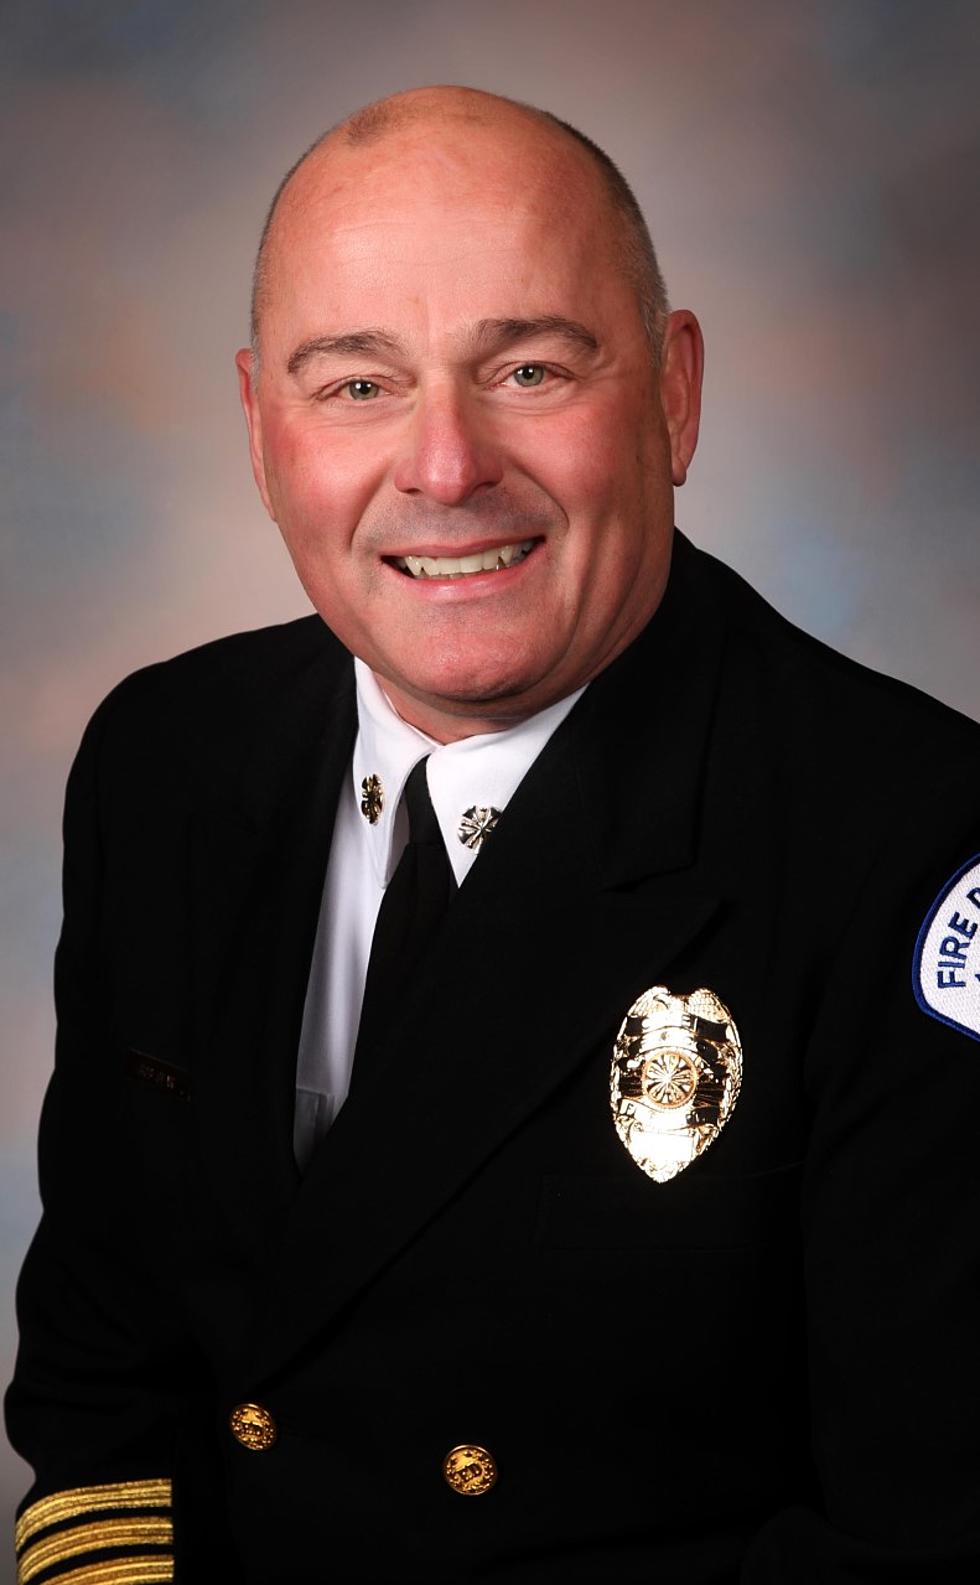 Pasco Fire Chief to Retire in May